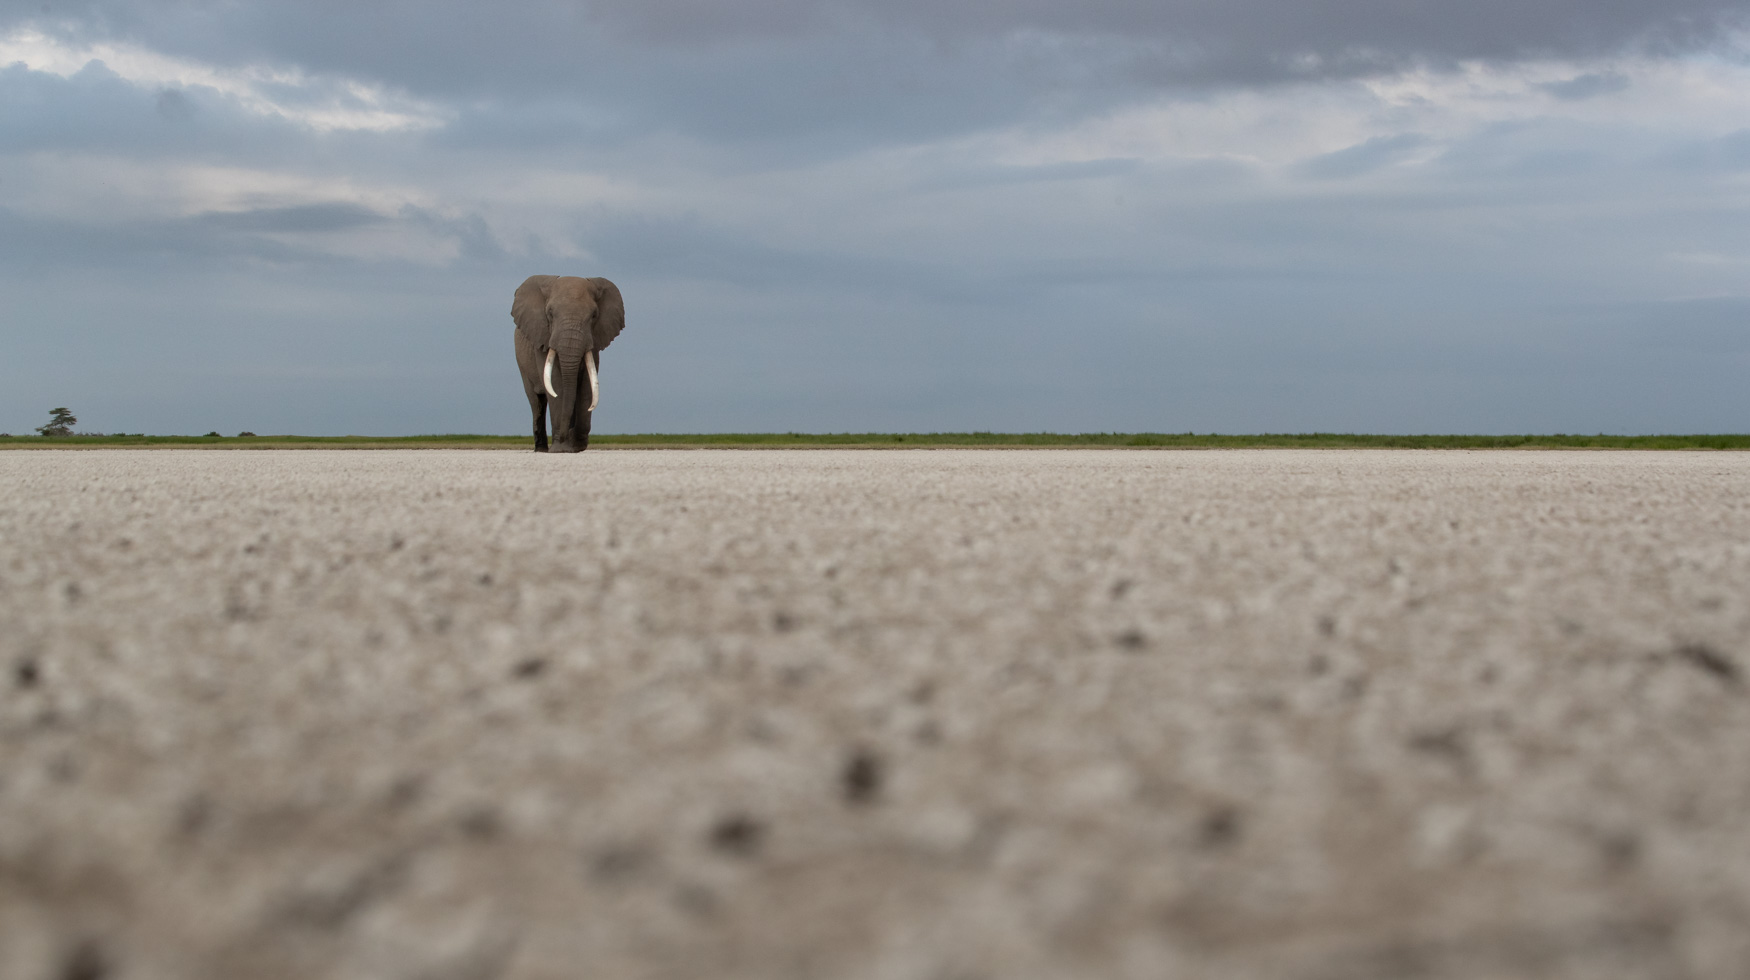 The Amboseli dry lakebed with an Elephant.